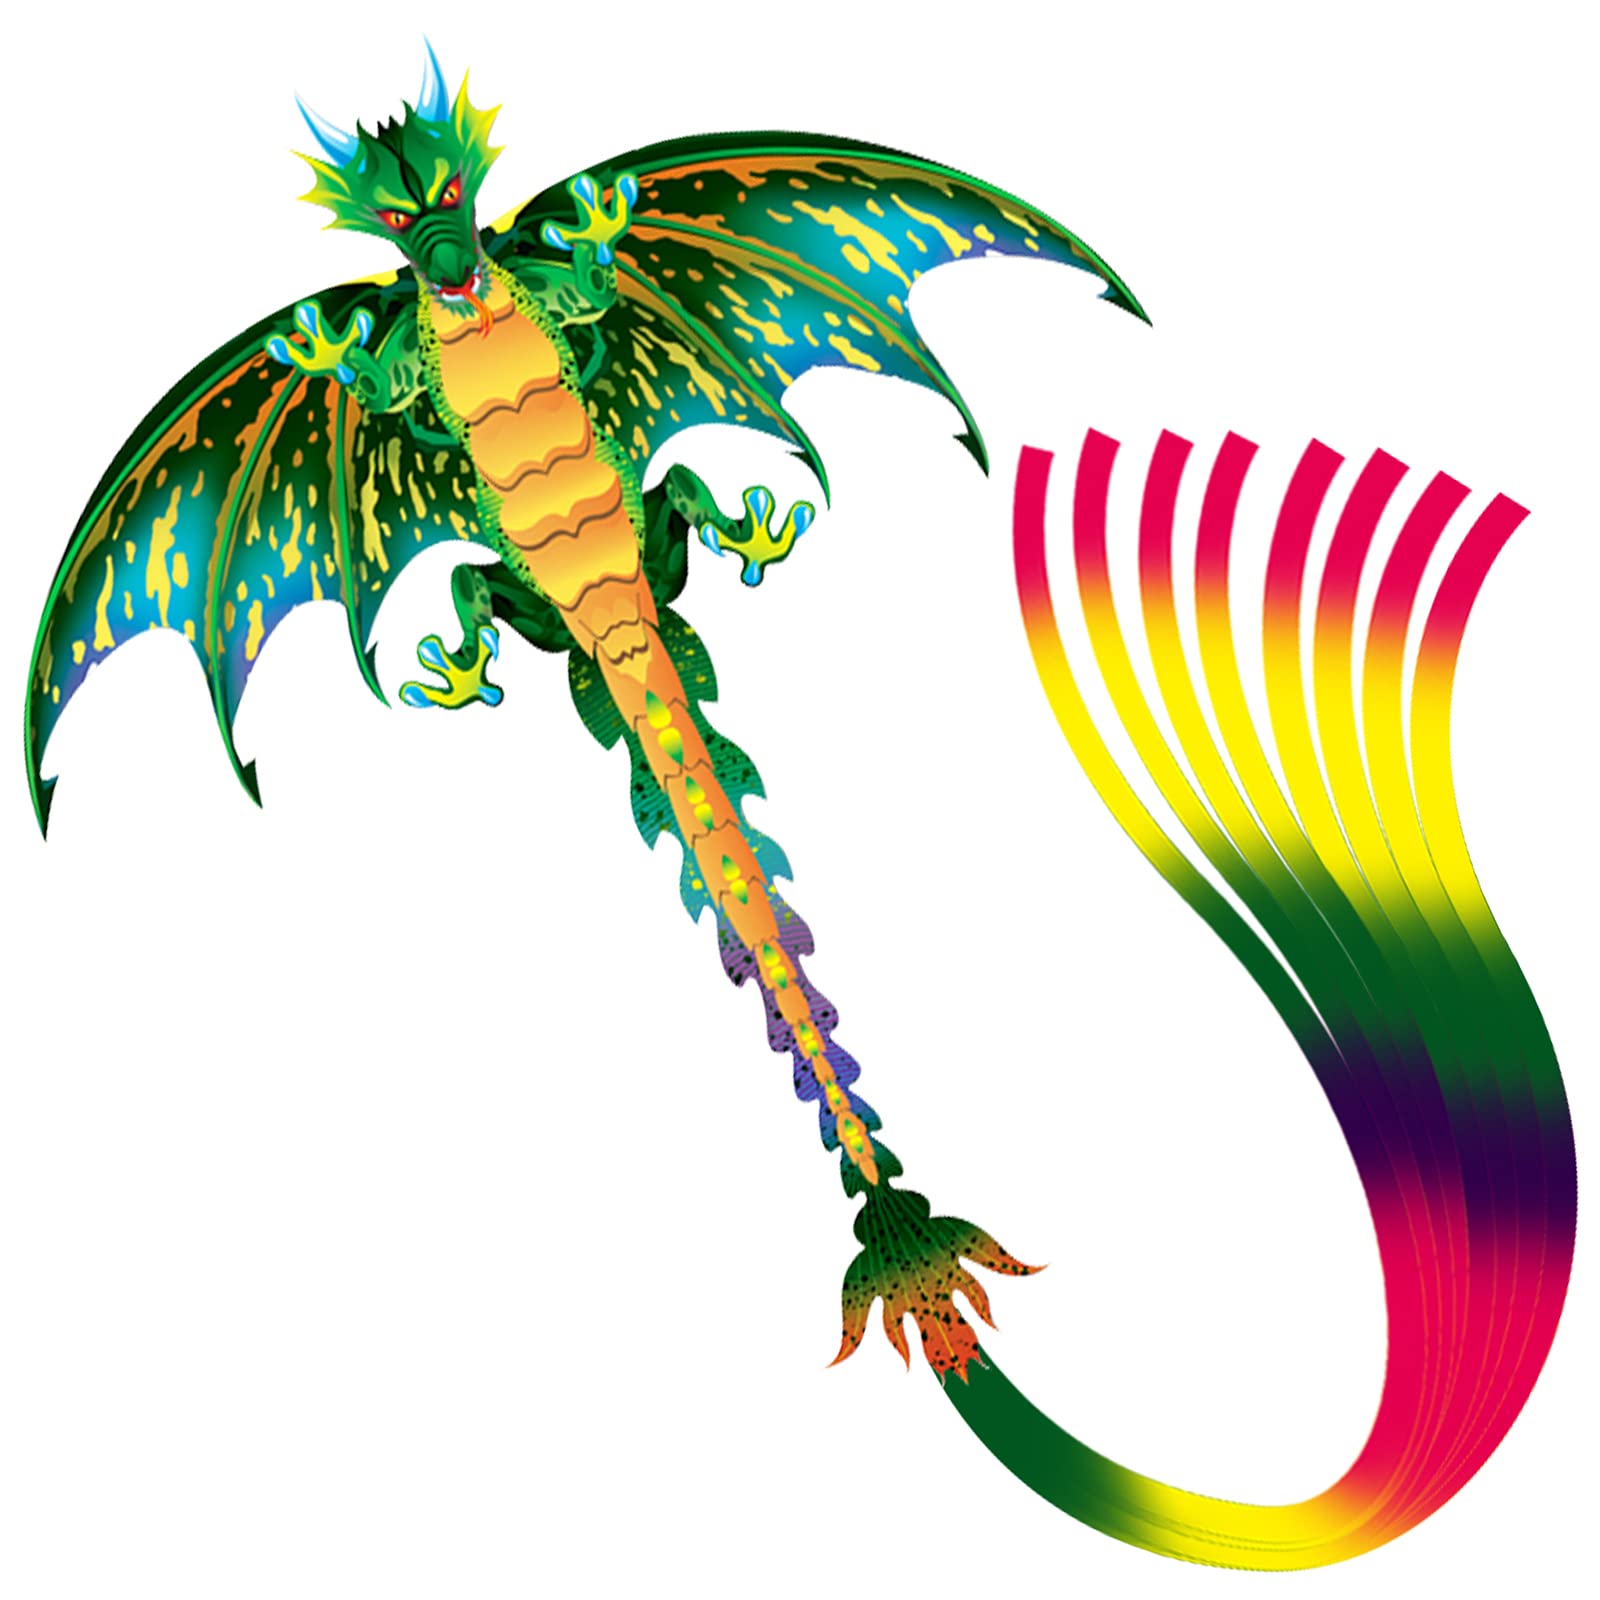 eyijklzo Green Dragon Kite Beautiful and Easy Flyer Kite for Children and  Adult with Long Colorful